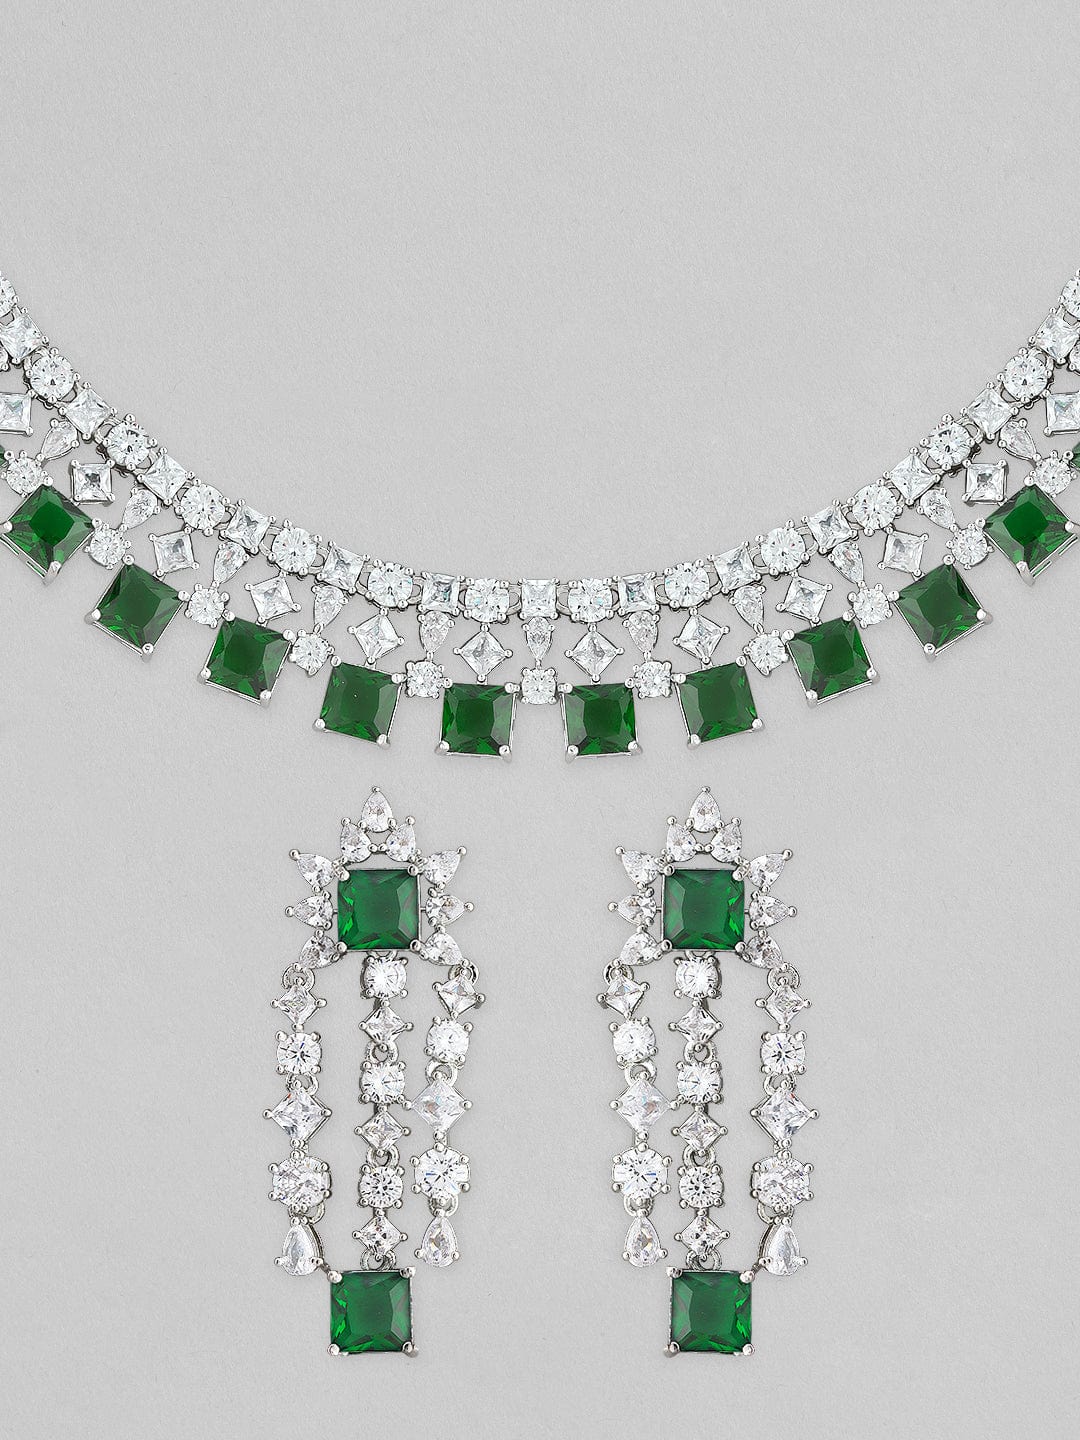 Rubans Silver Plated Necklace Set With American Diamonds And Green Stones. Choker Necklace Set